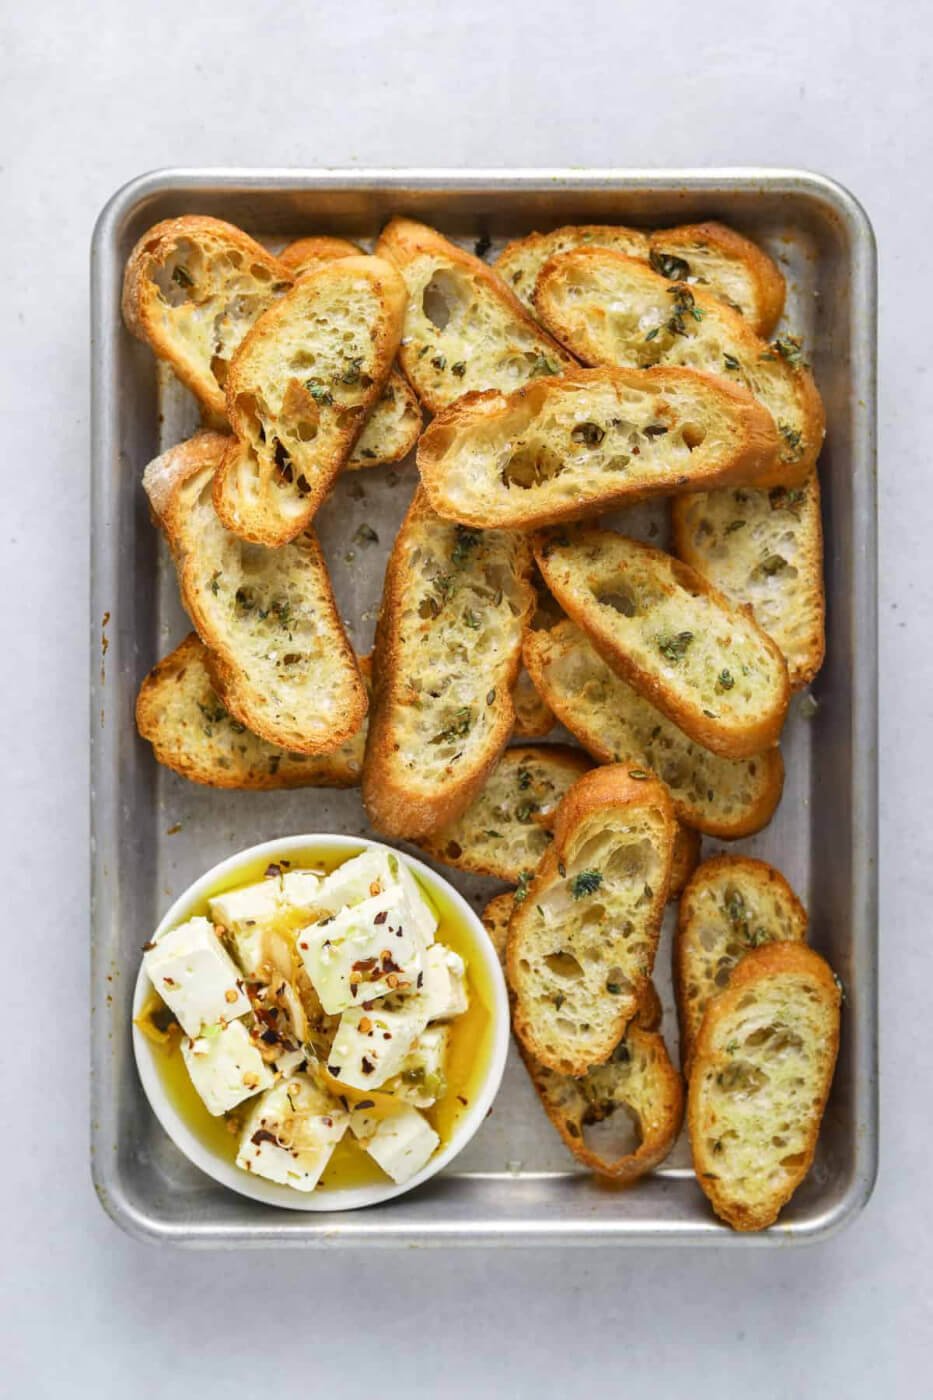 This Gourmet French Bread Pizza is a Delicious Bite-Sized Treat!